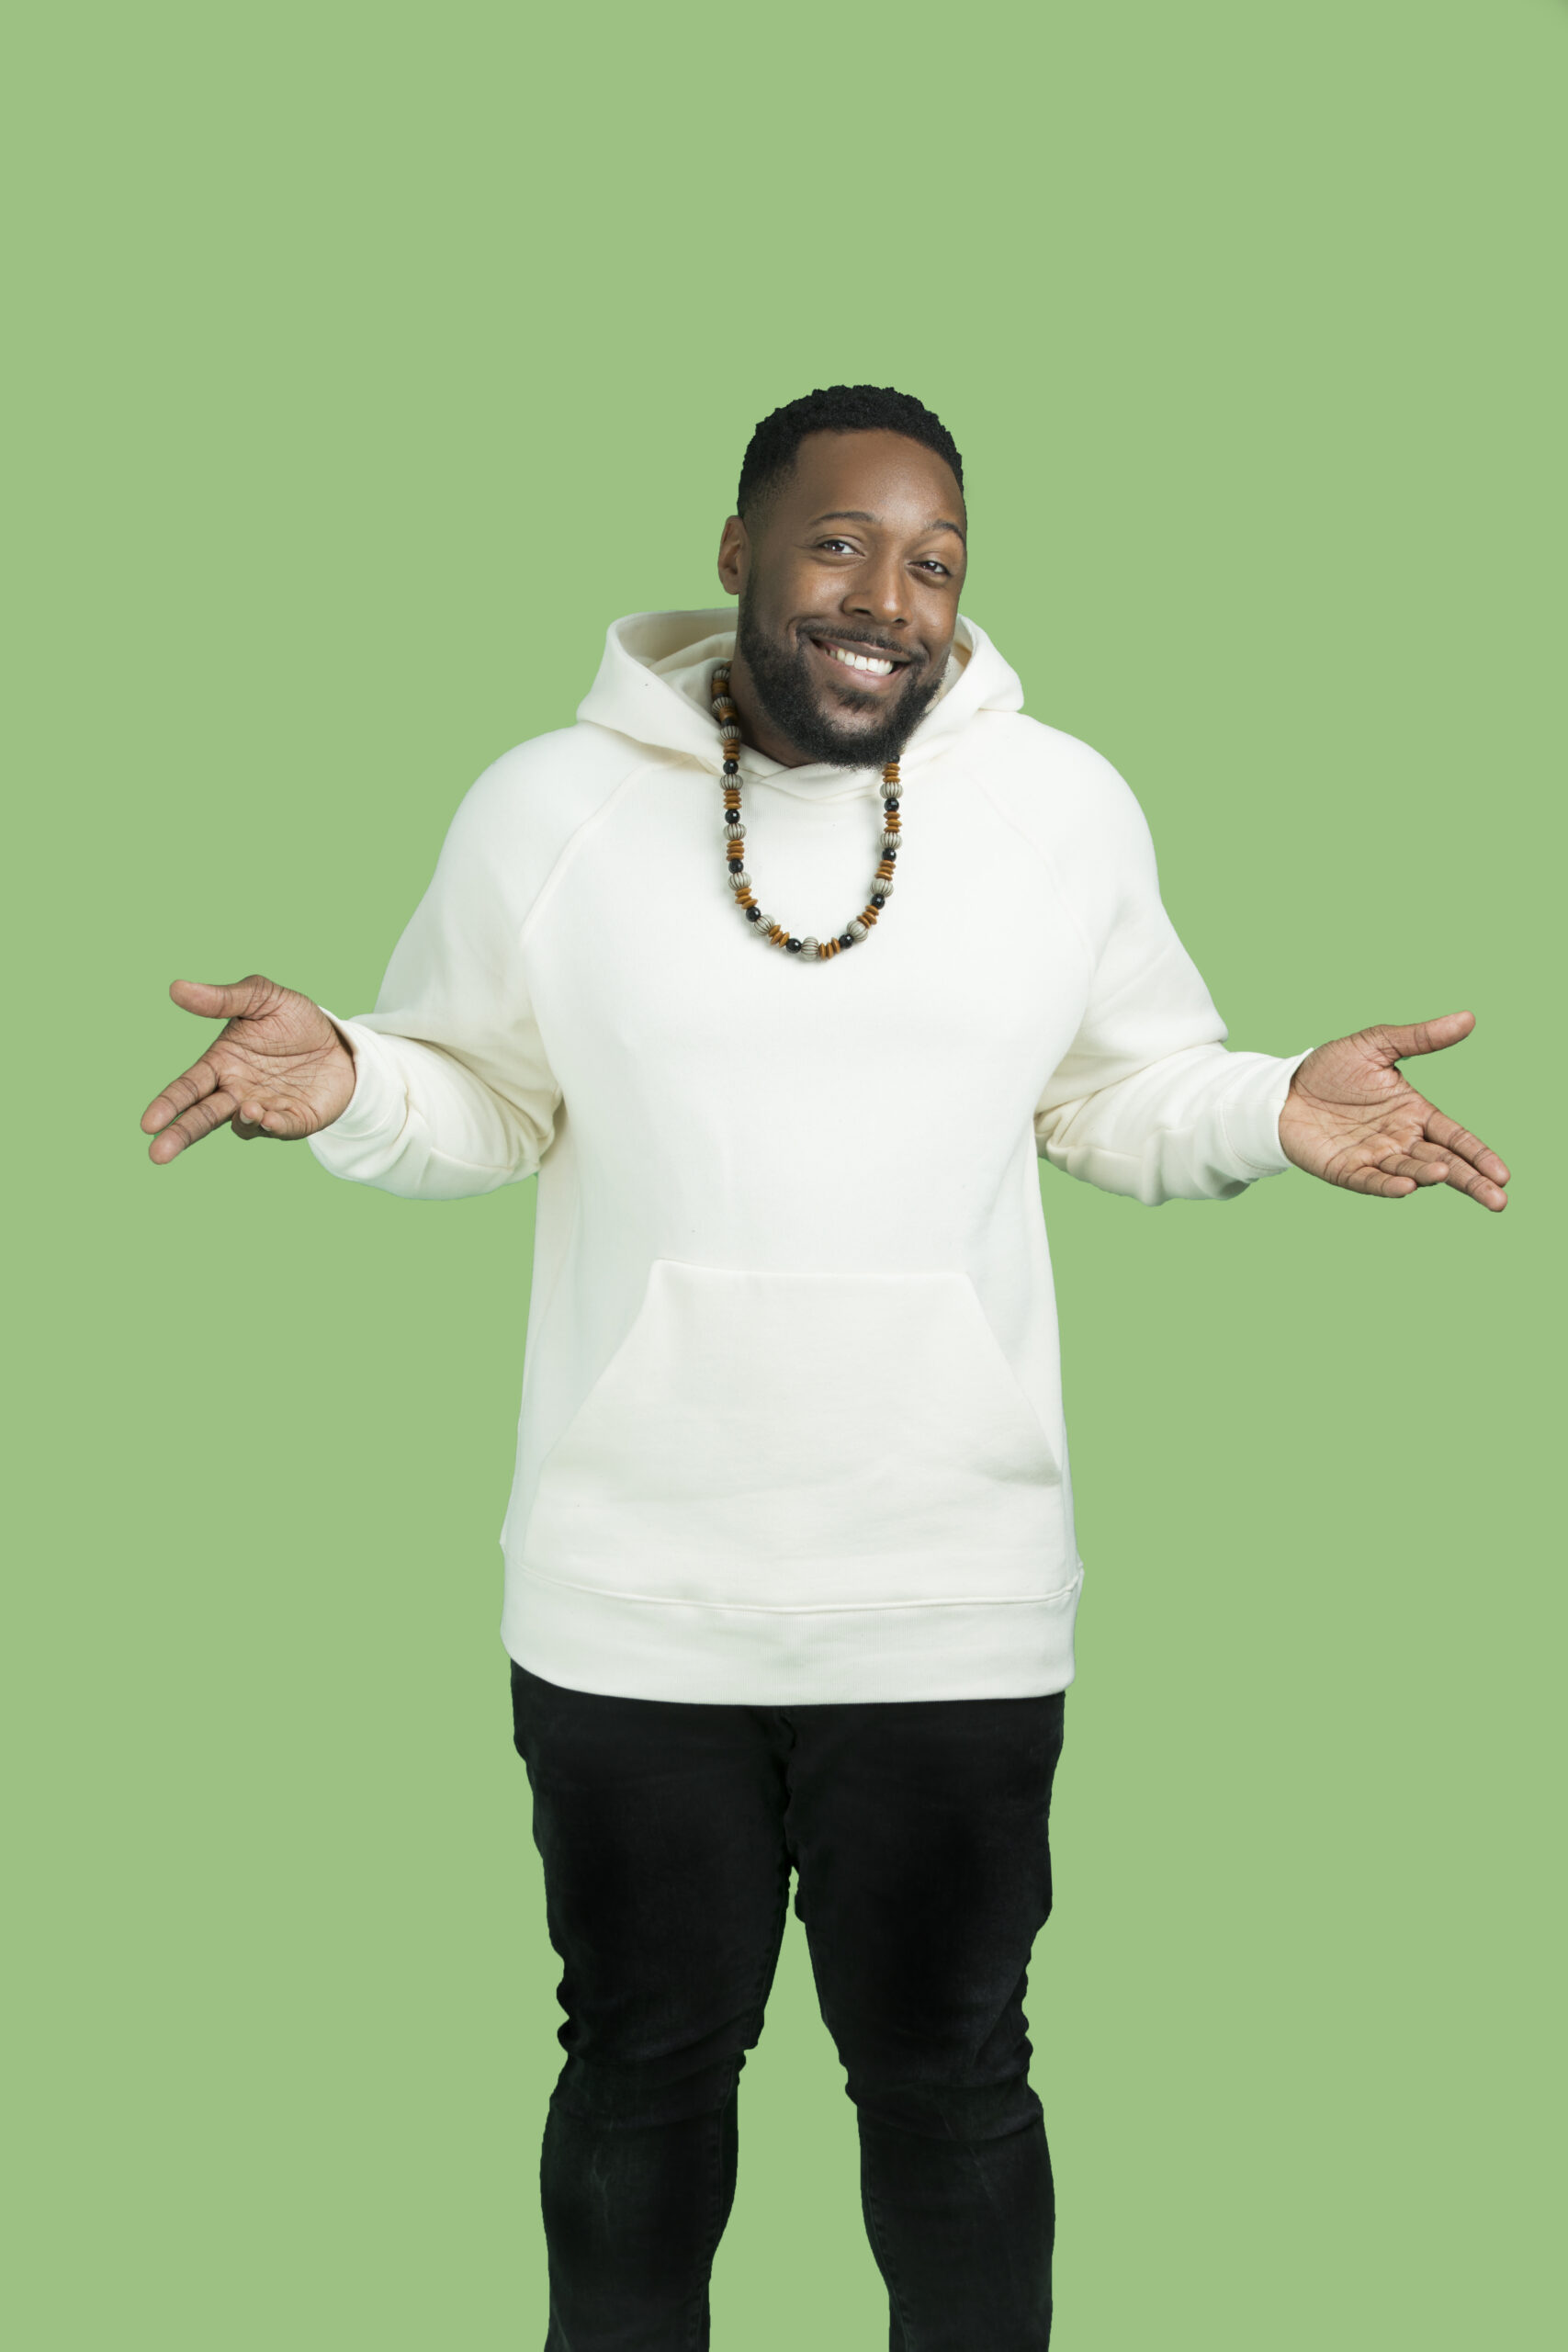 A man smiling and shrugging with his hands out to the sides. He is wearing a white hoodie, a beaded necklace, and black pants, standing against a plain green background